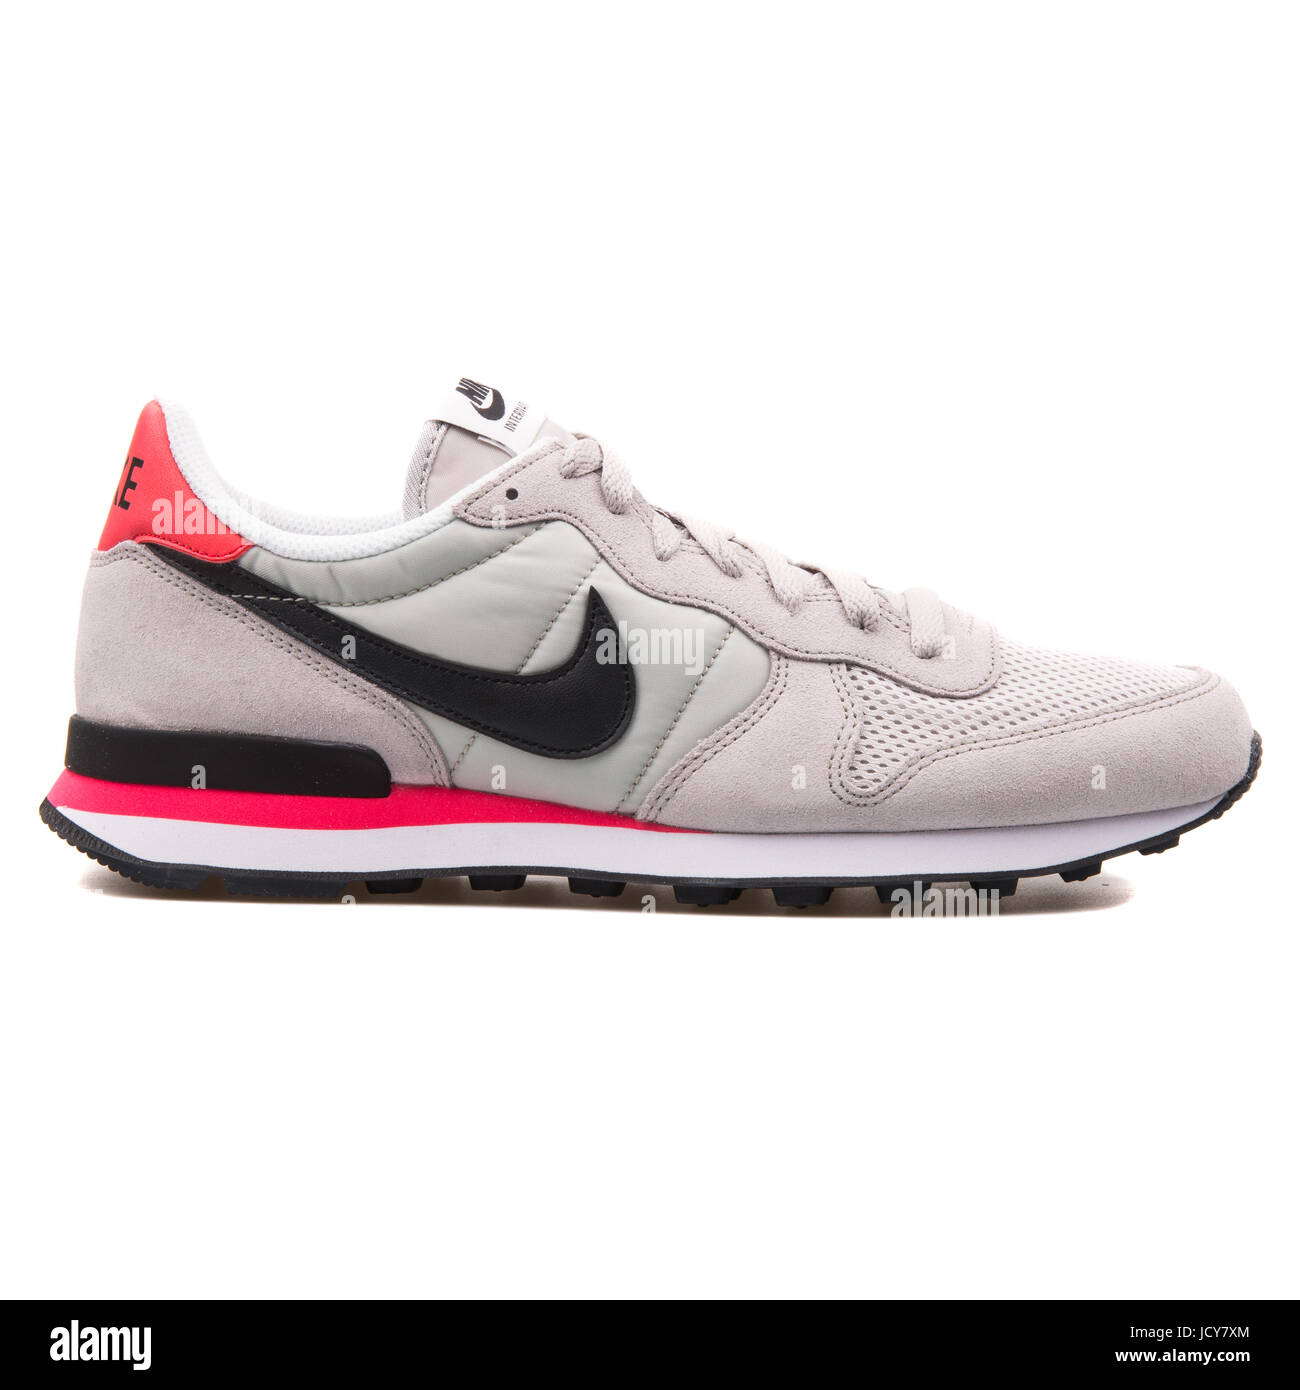 Nike Internationalist Neutral Grey, Black and infra Red Men's Running Shoes - 631754-006 Stock Photo Alamy